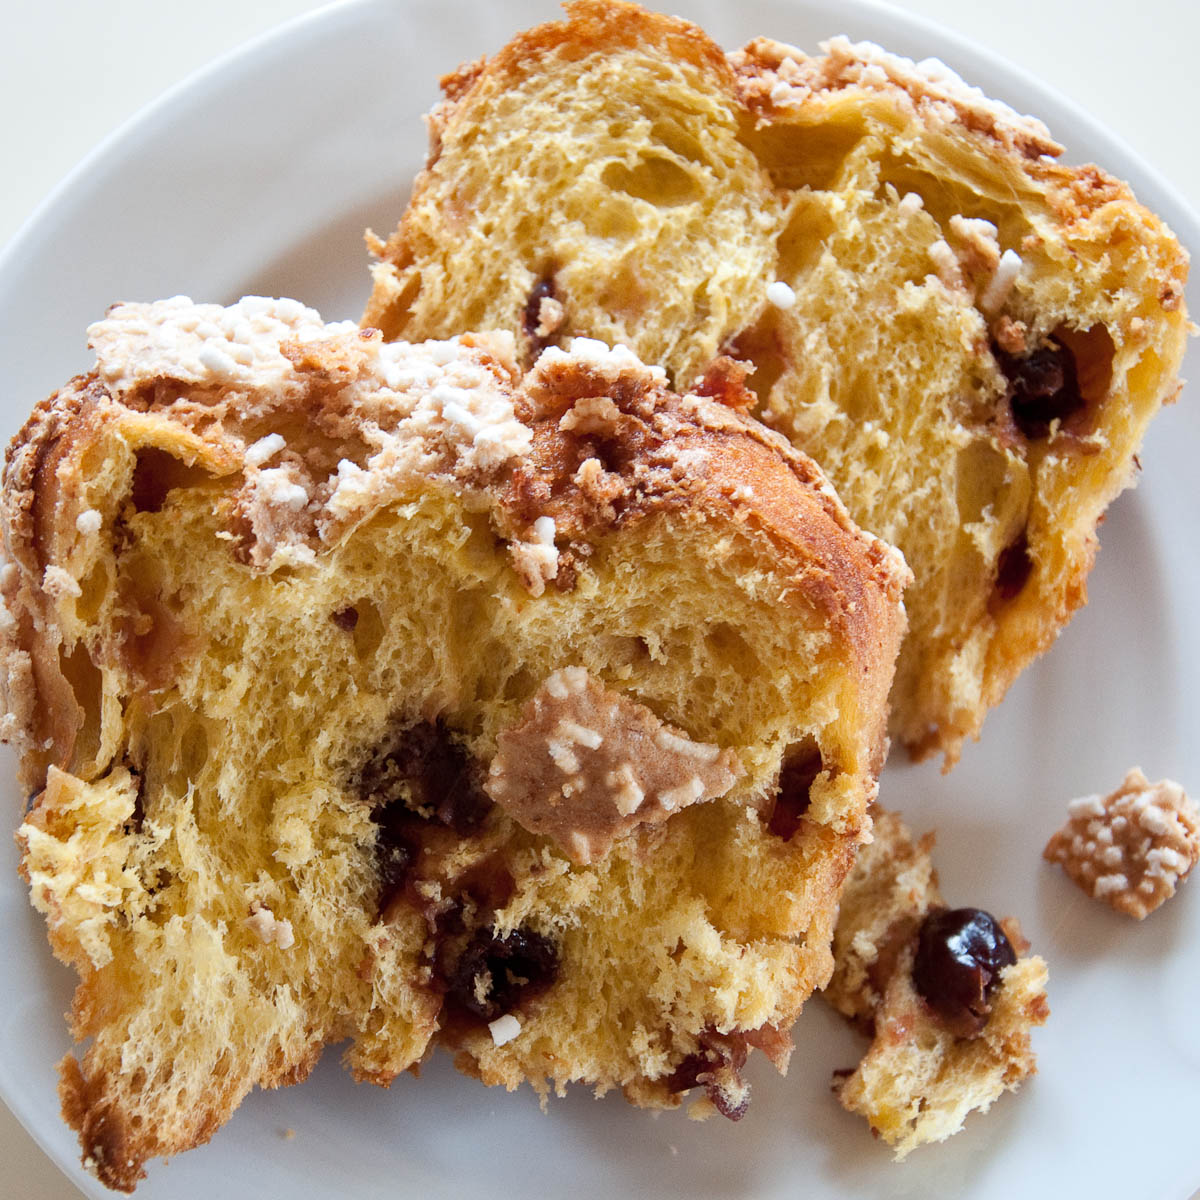 Thick slices of artisan cherry loaf, Marostica, Veneto, Italy - www.rossiwrites.com